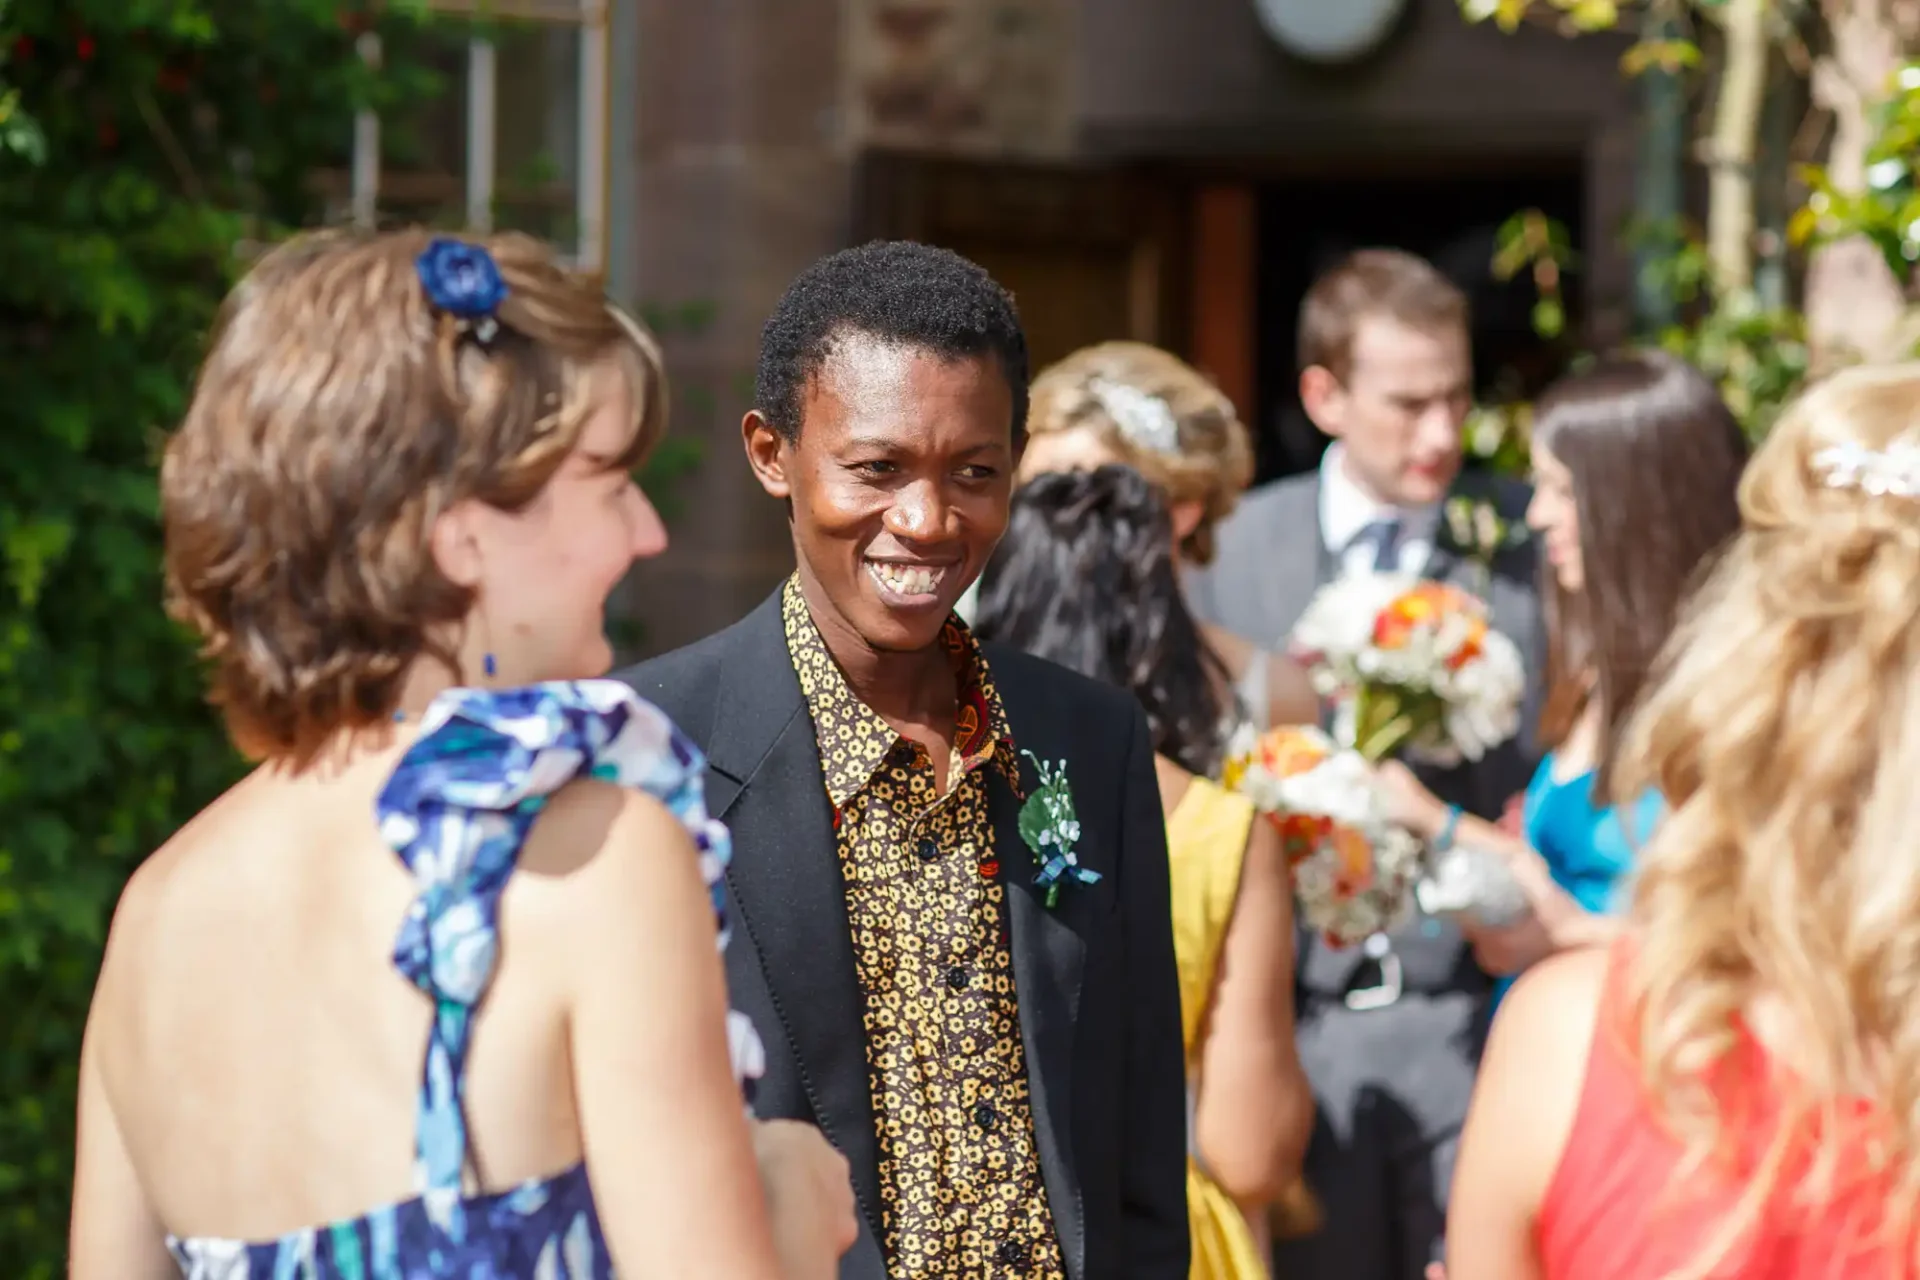 A smiling person in a patterned gold and black outfit interacts with guests at a sunny outdoor wedding.